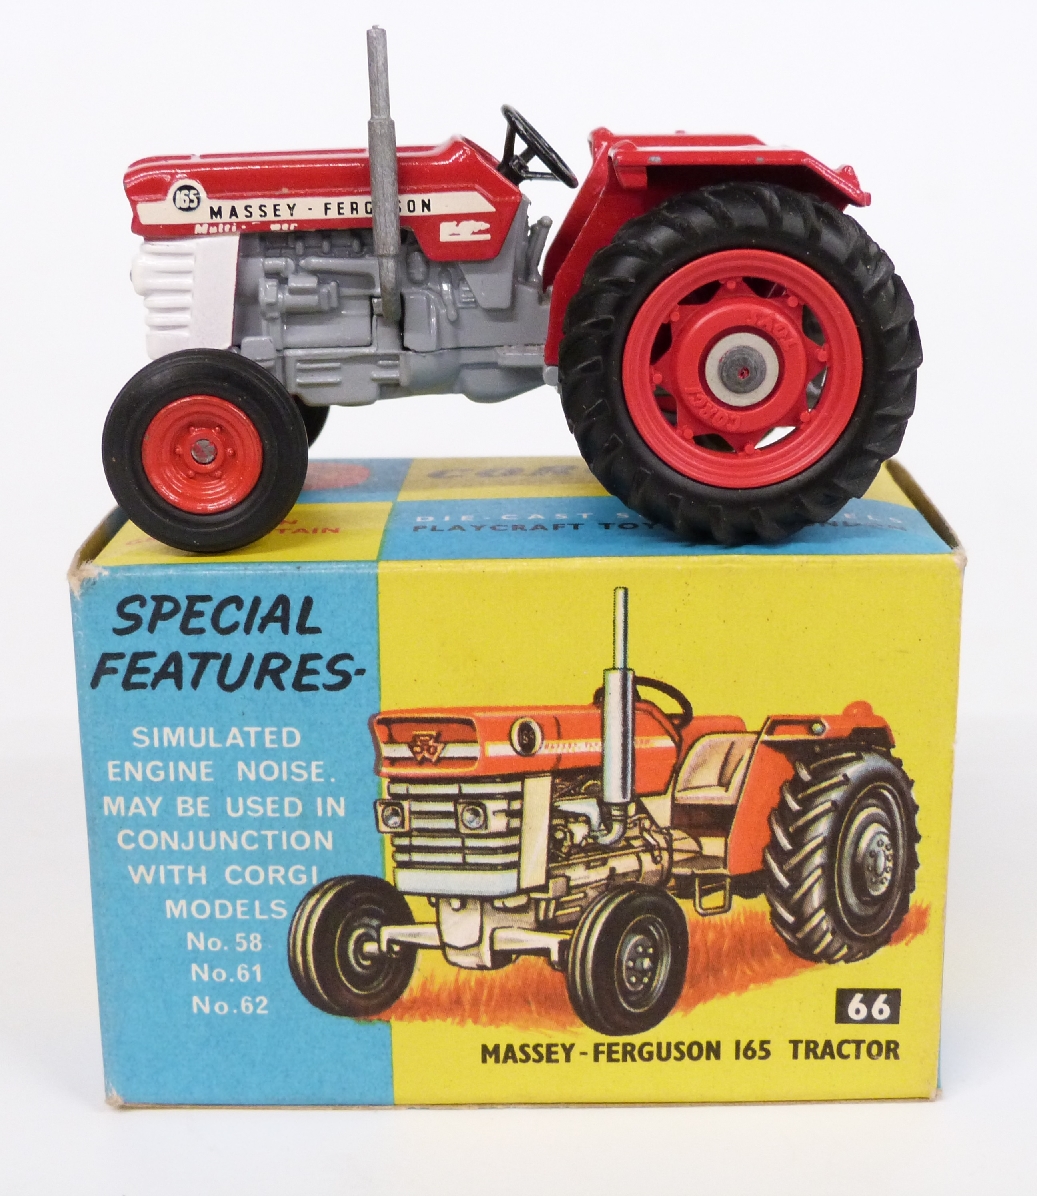 Corgi Toys diecast model Massey-Ferguson '165' Tractor with red body and hubs 66, in original box - Image 2 of 6